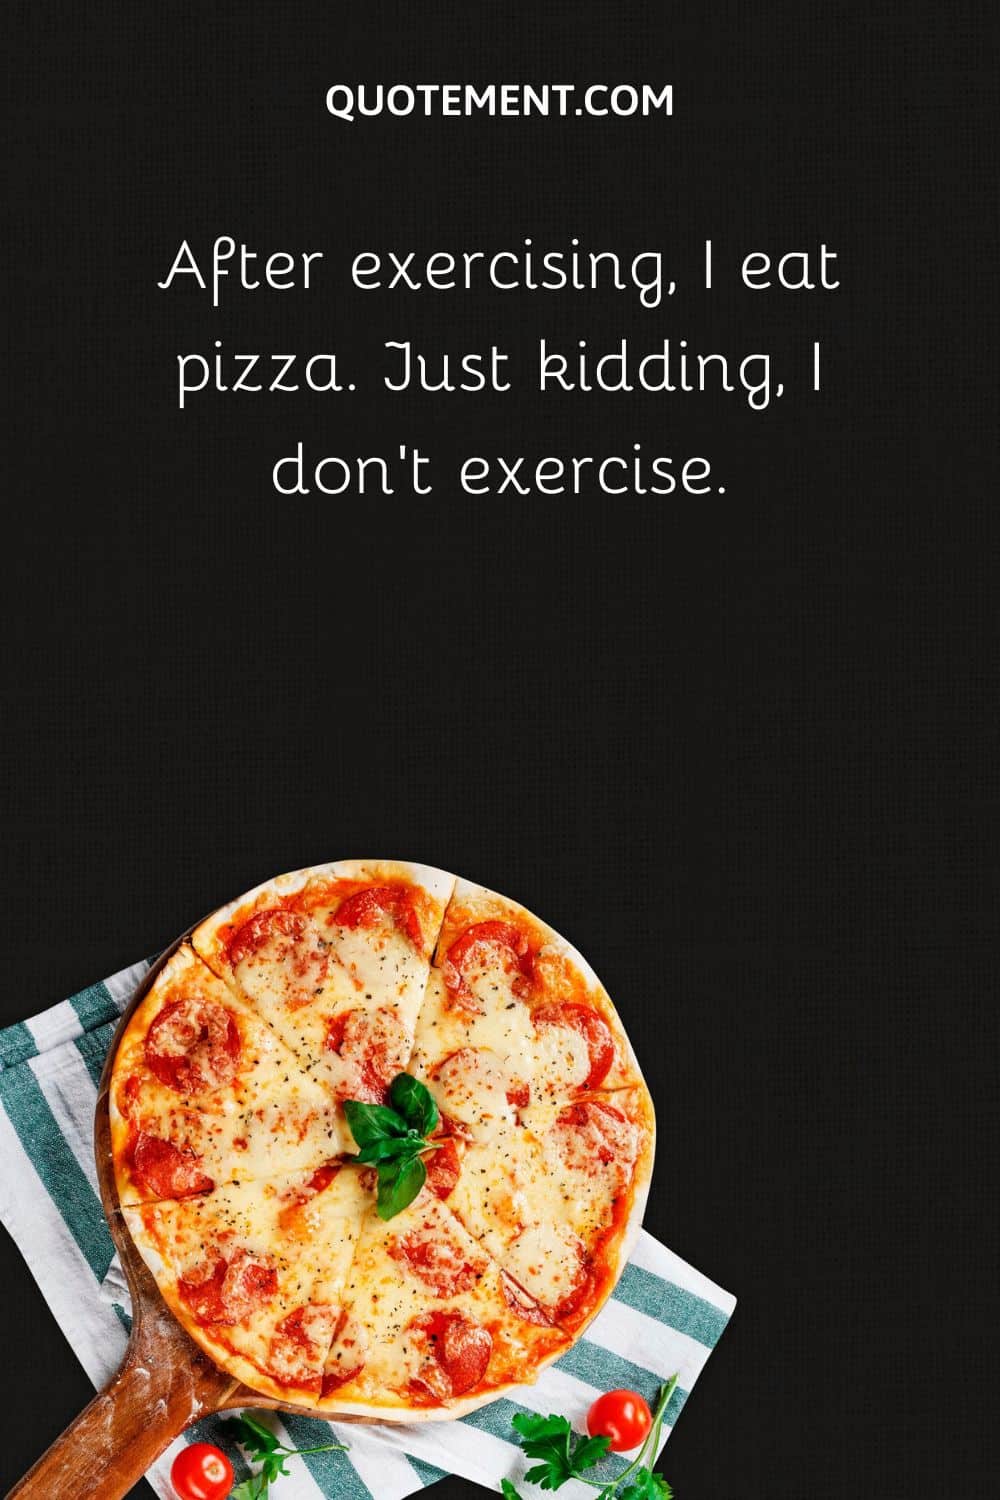 After exercising, I eat pizza